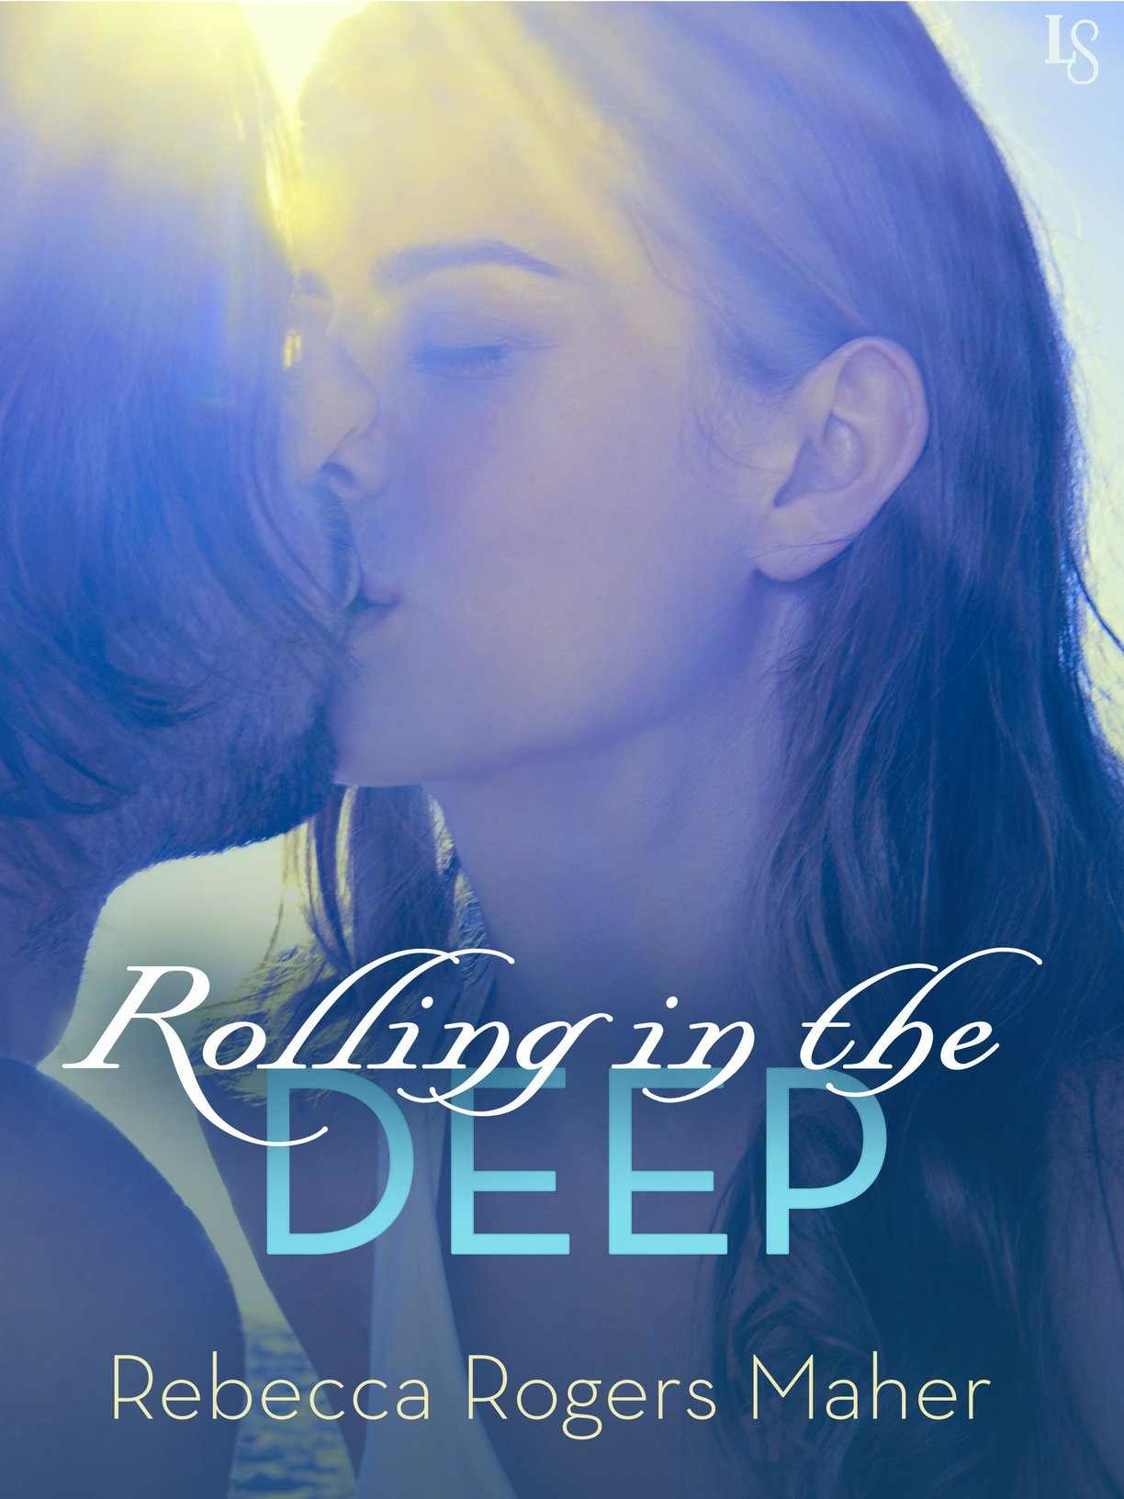 Rolling in the Deep by Rebecca Rogers Maher